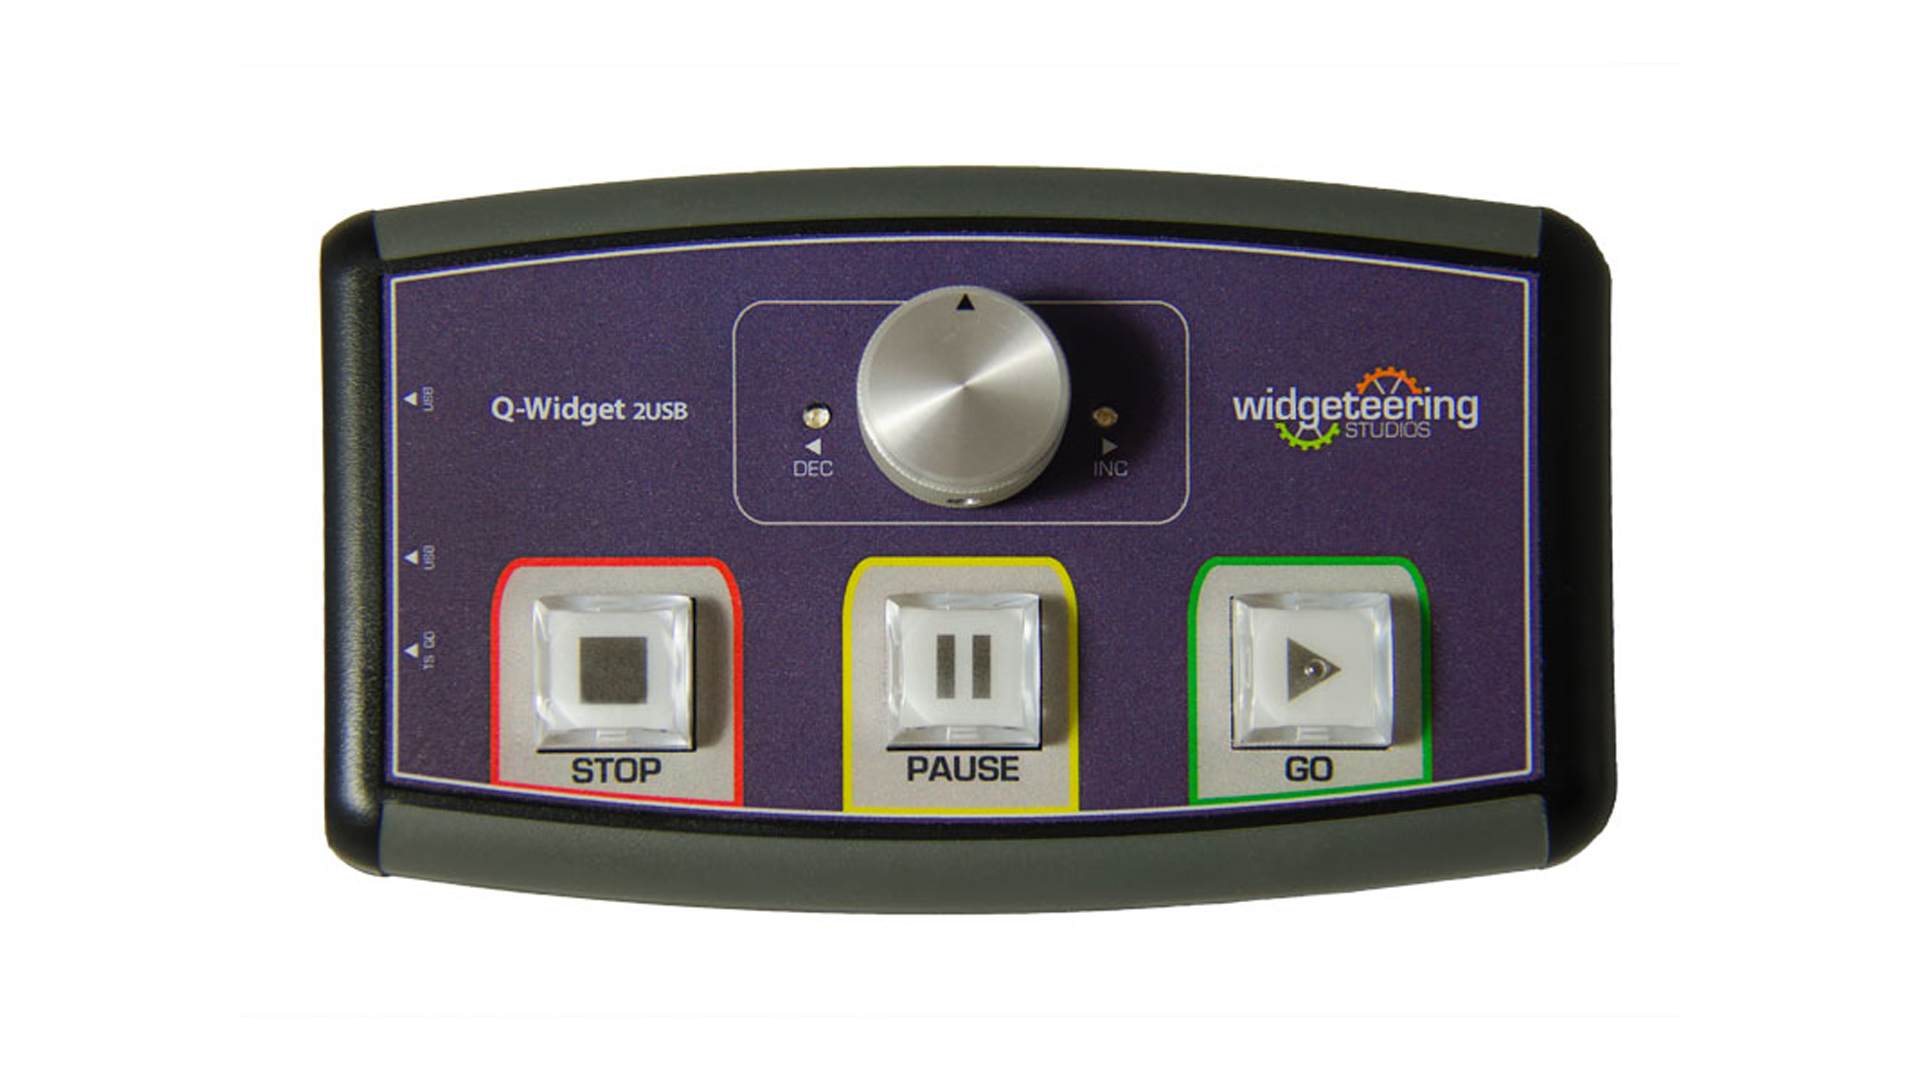 Hire QLab Q-Widget show control remote in Cardiff, Newport, Swansea, Carmarthenshire, Pembrokeshire & South West Wales